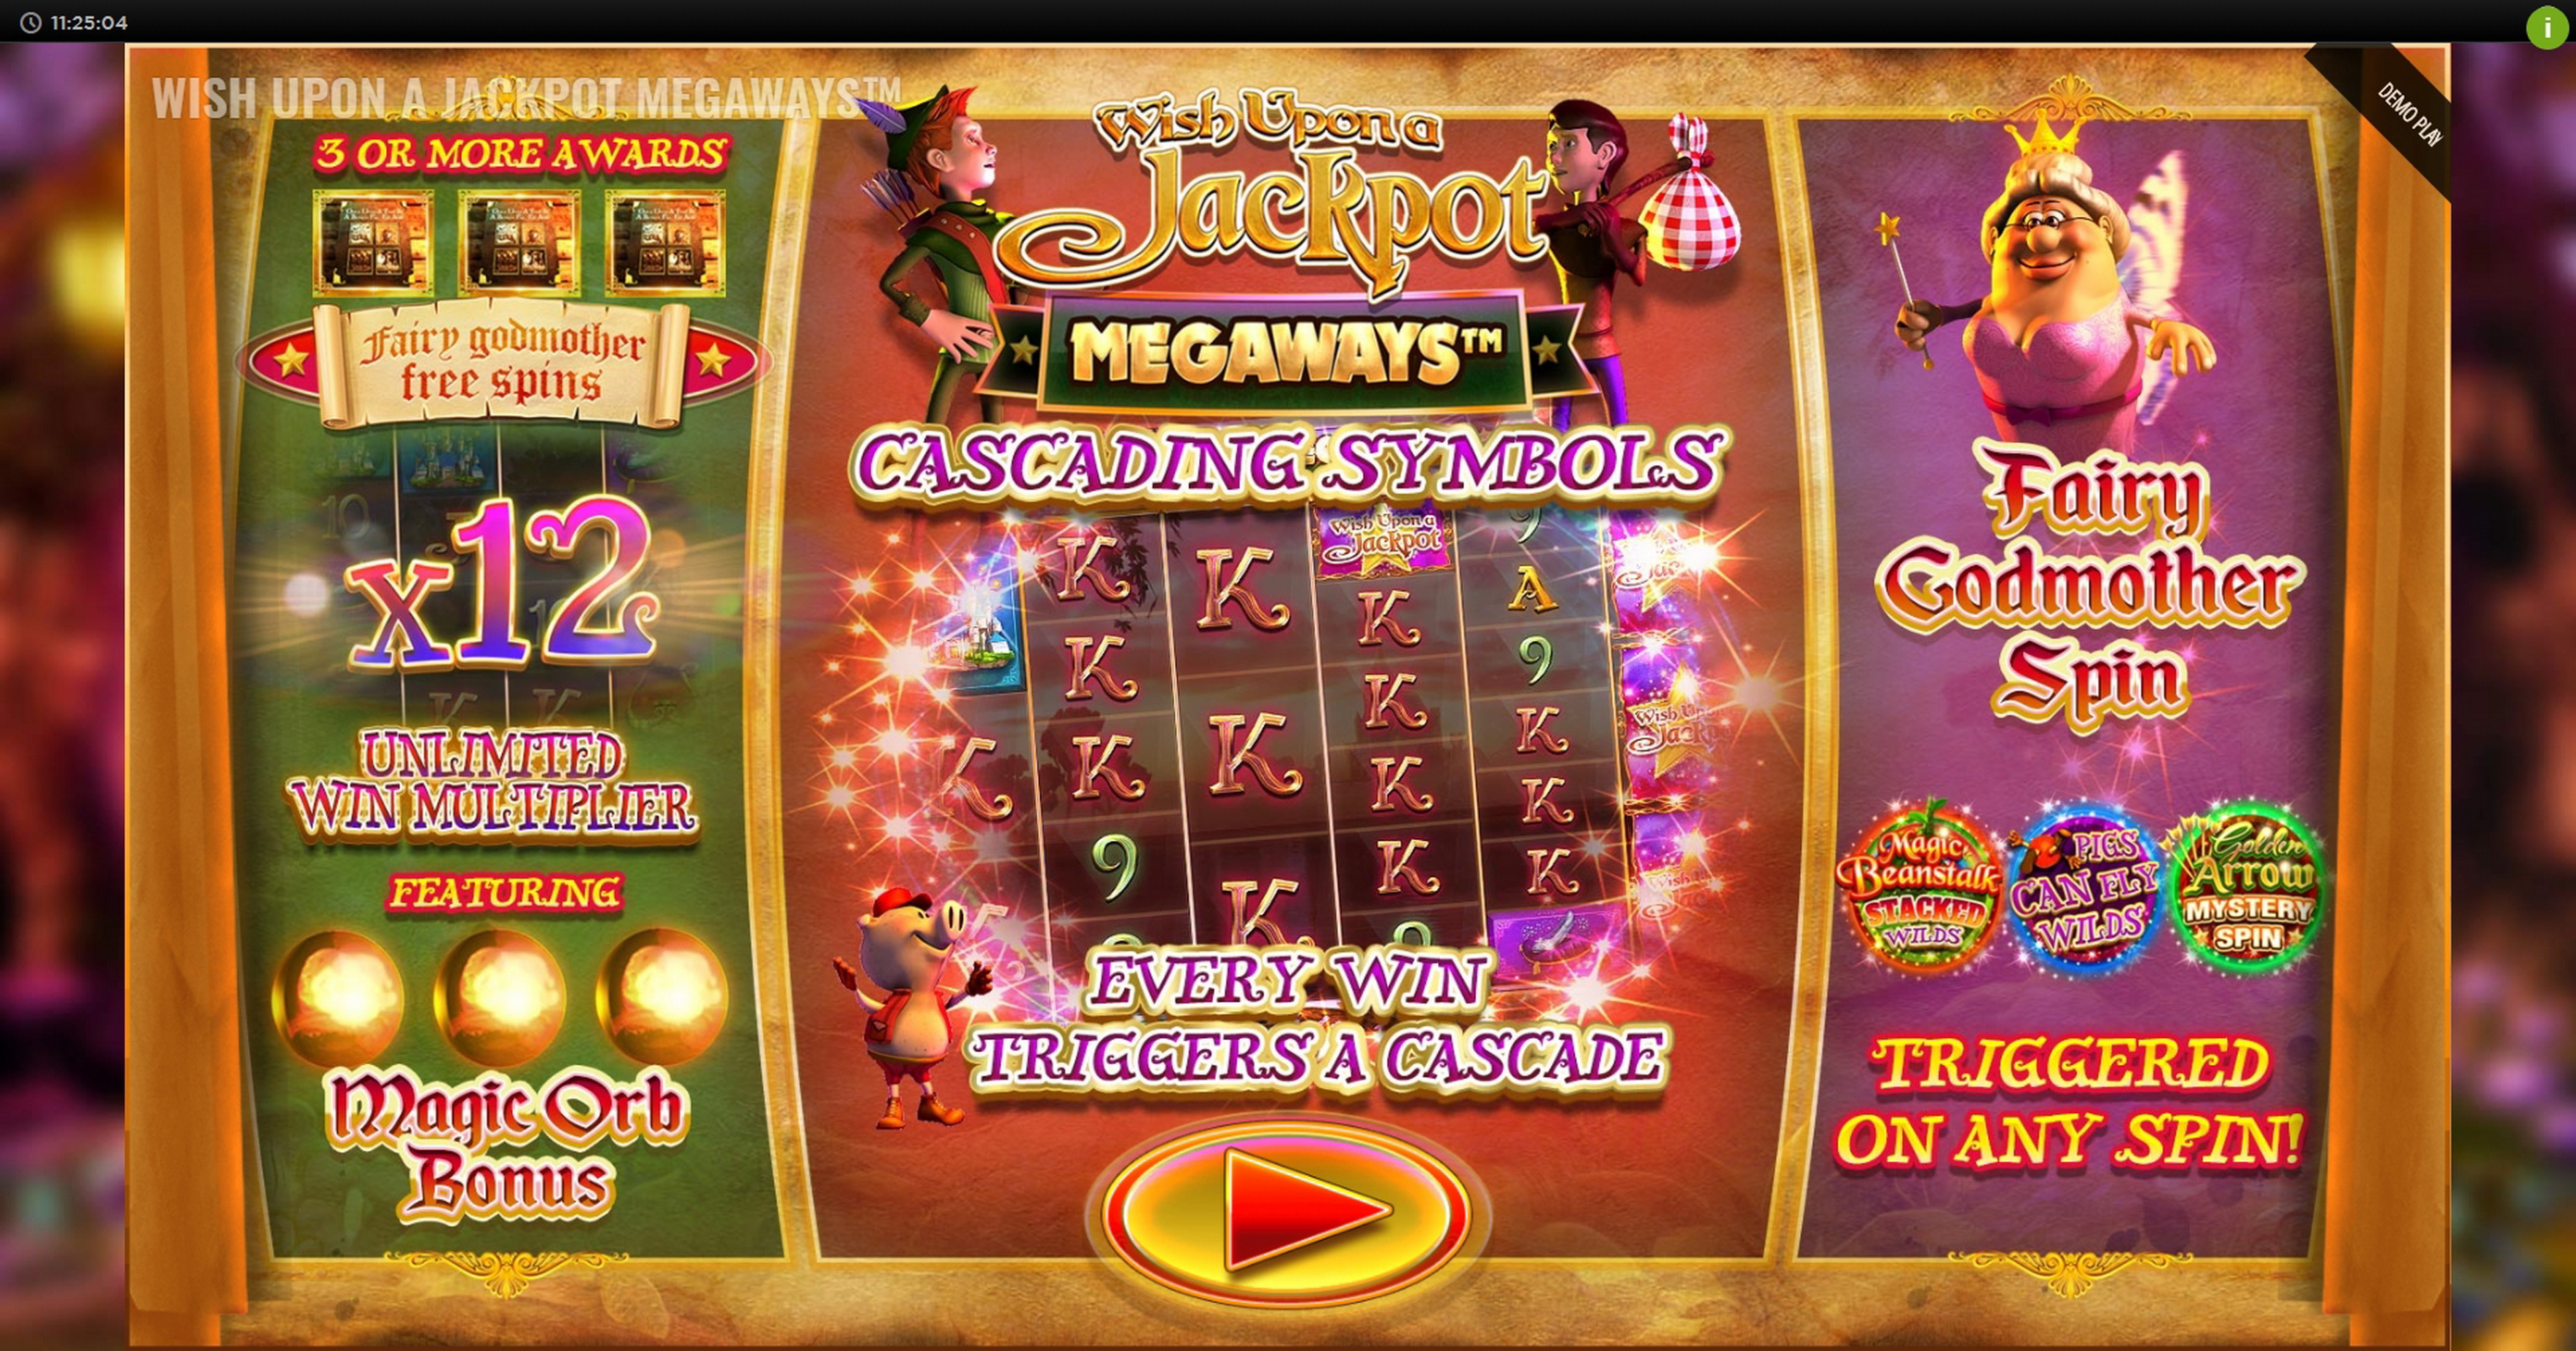 Play Wish Upon A Jackpot Megaways Free Casino Slot Game by Blueprint Gaming